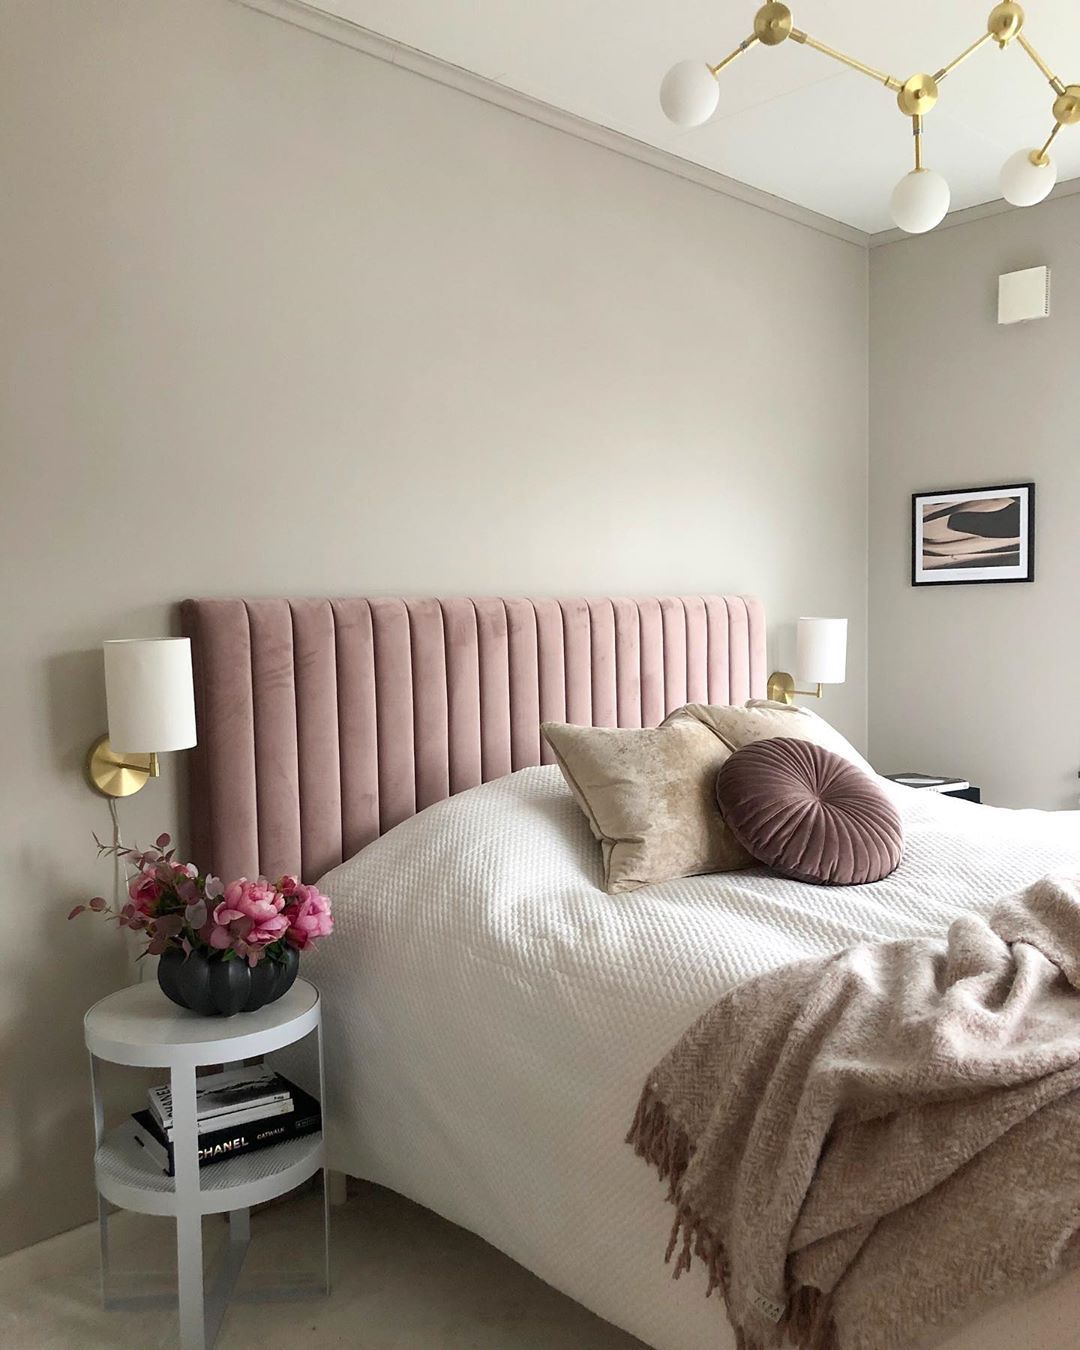 Glam bedroom decor with Dusty rose channeled headboard via @interiorbyvanessa